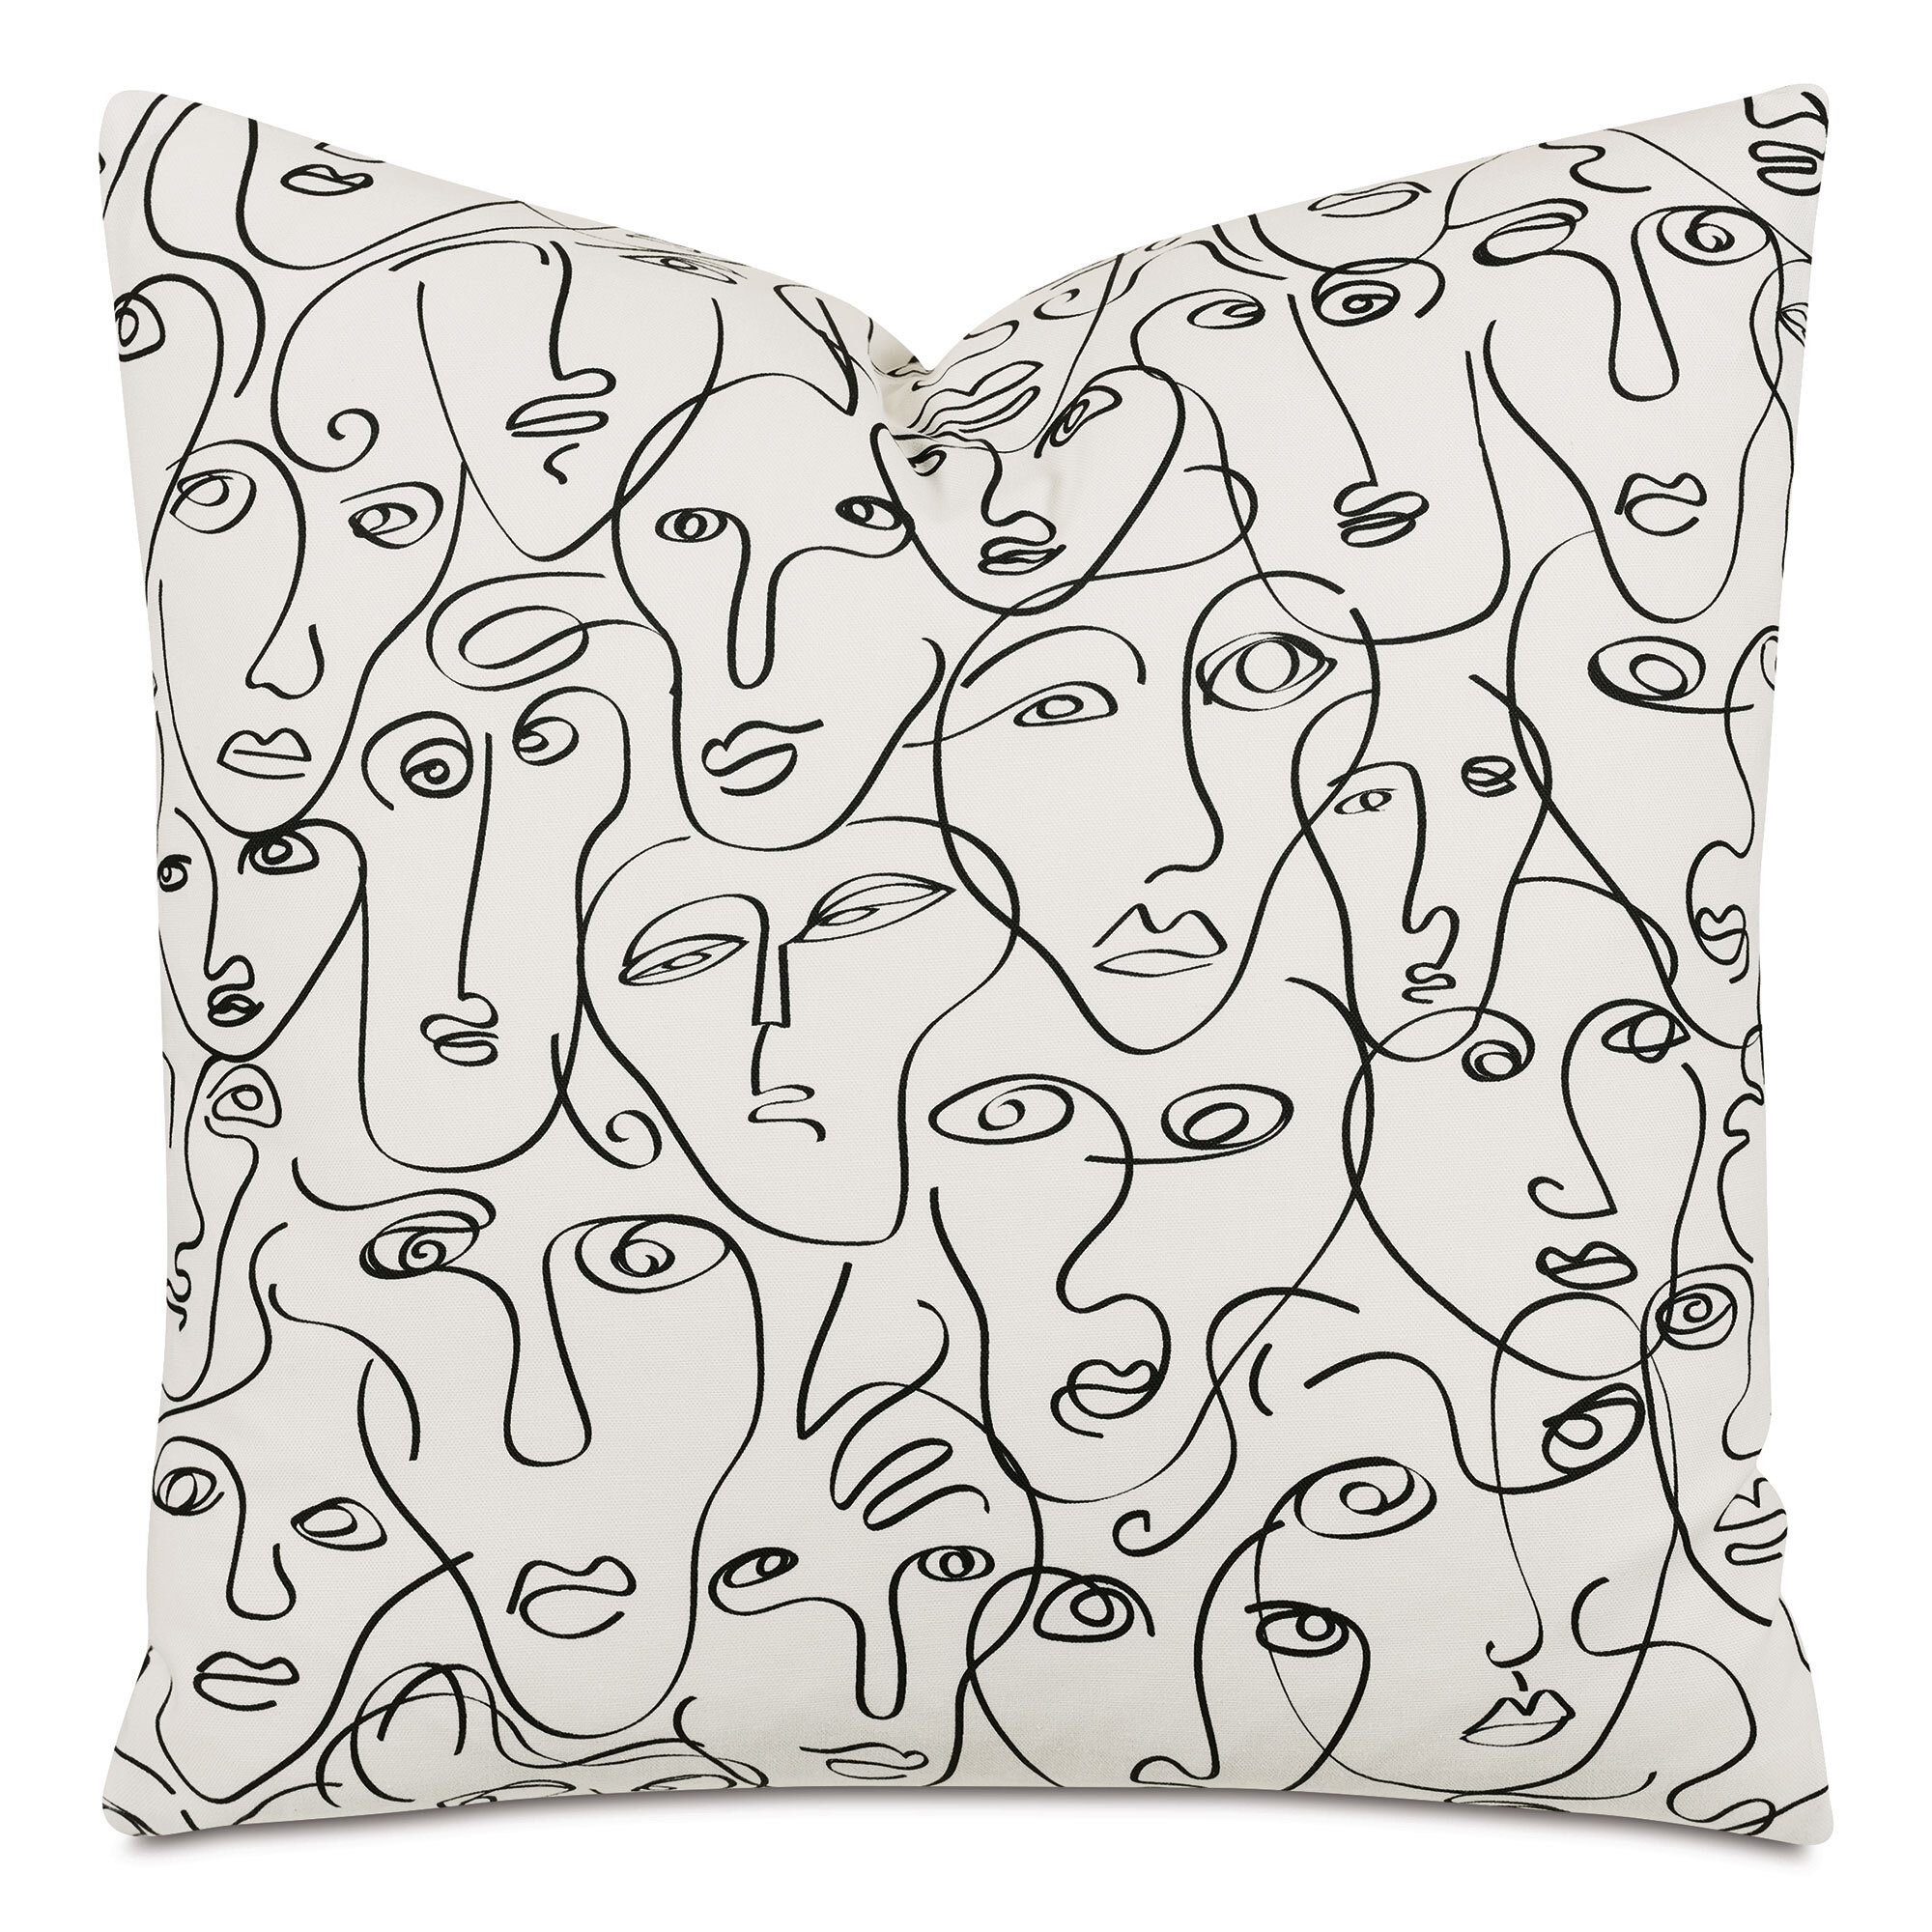 Ultra Polly Down Decorative Pillow Inserts Down & Poly Blend